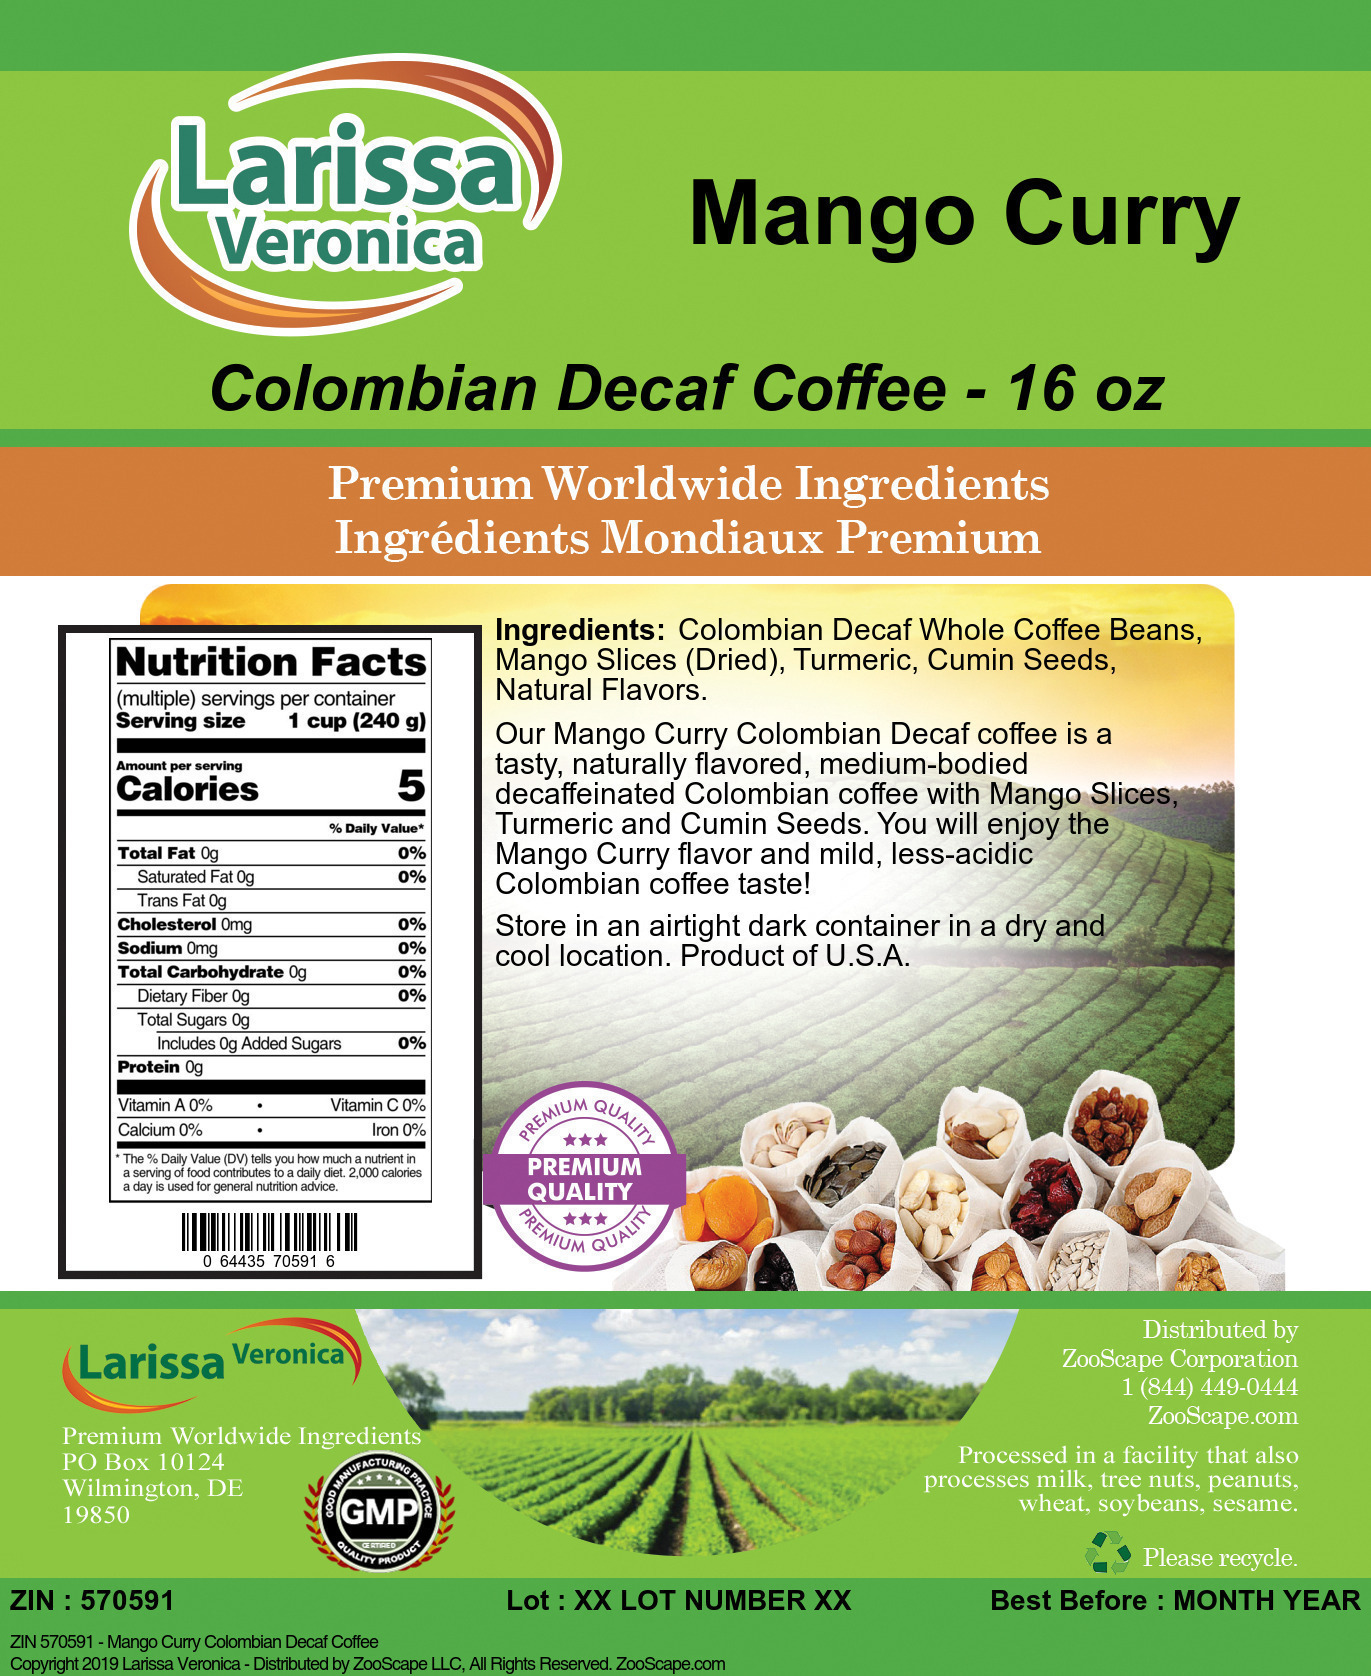 Mango Curry Colombian Decaf Coffee - Label